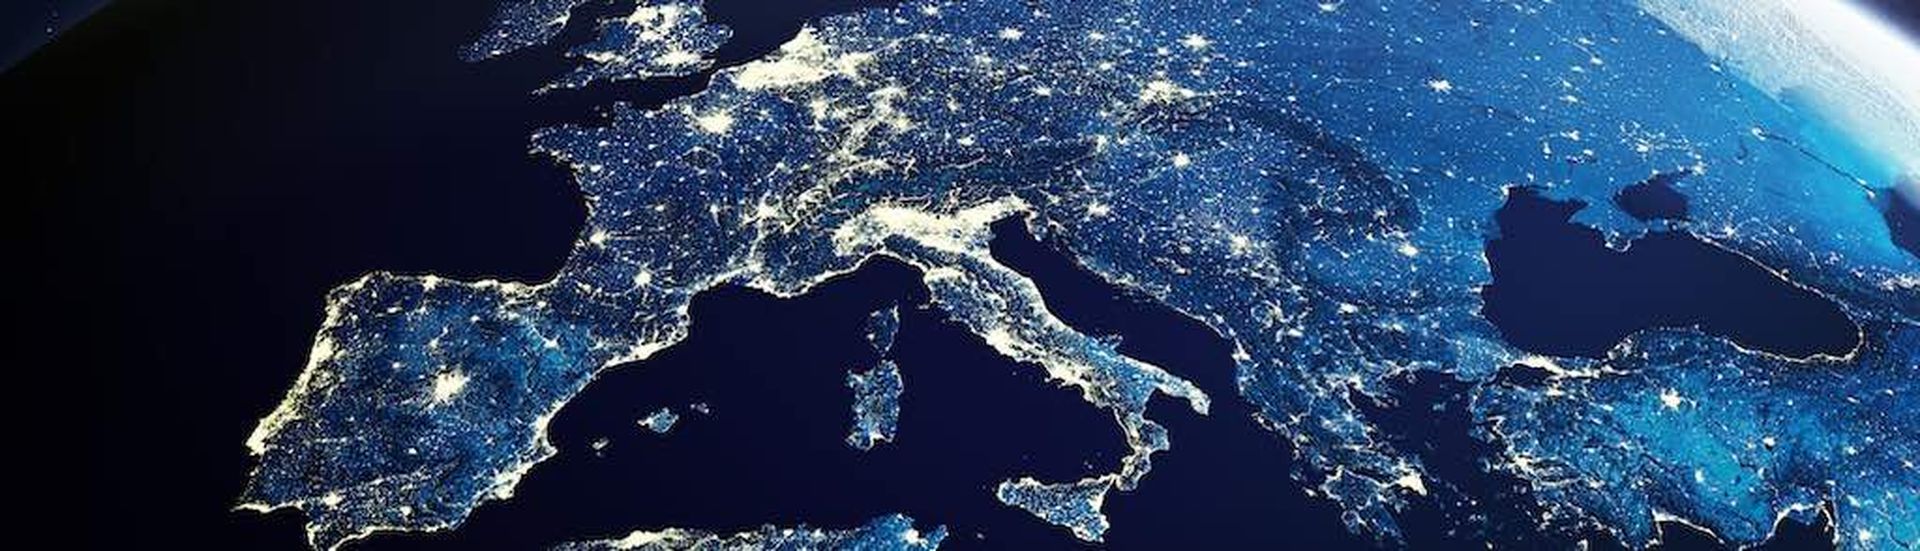 Europe from space at night with city lights showing European cities in Germany, France, Spain, Italy and United Kingdom (UK), global overview, 3d rendering of planet Earth, elements from NASA